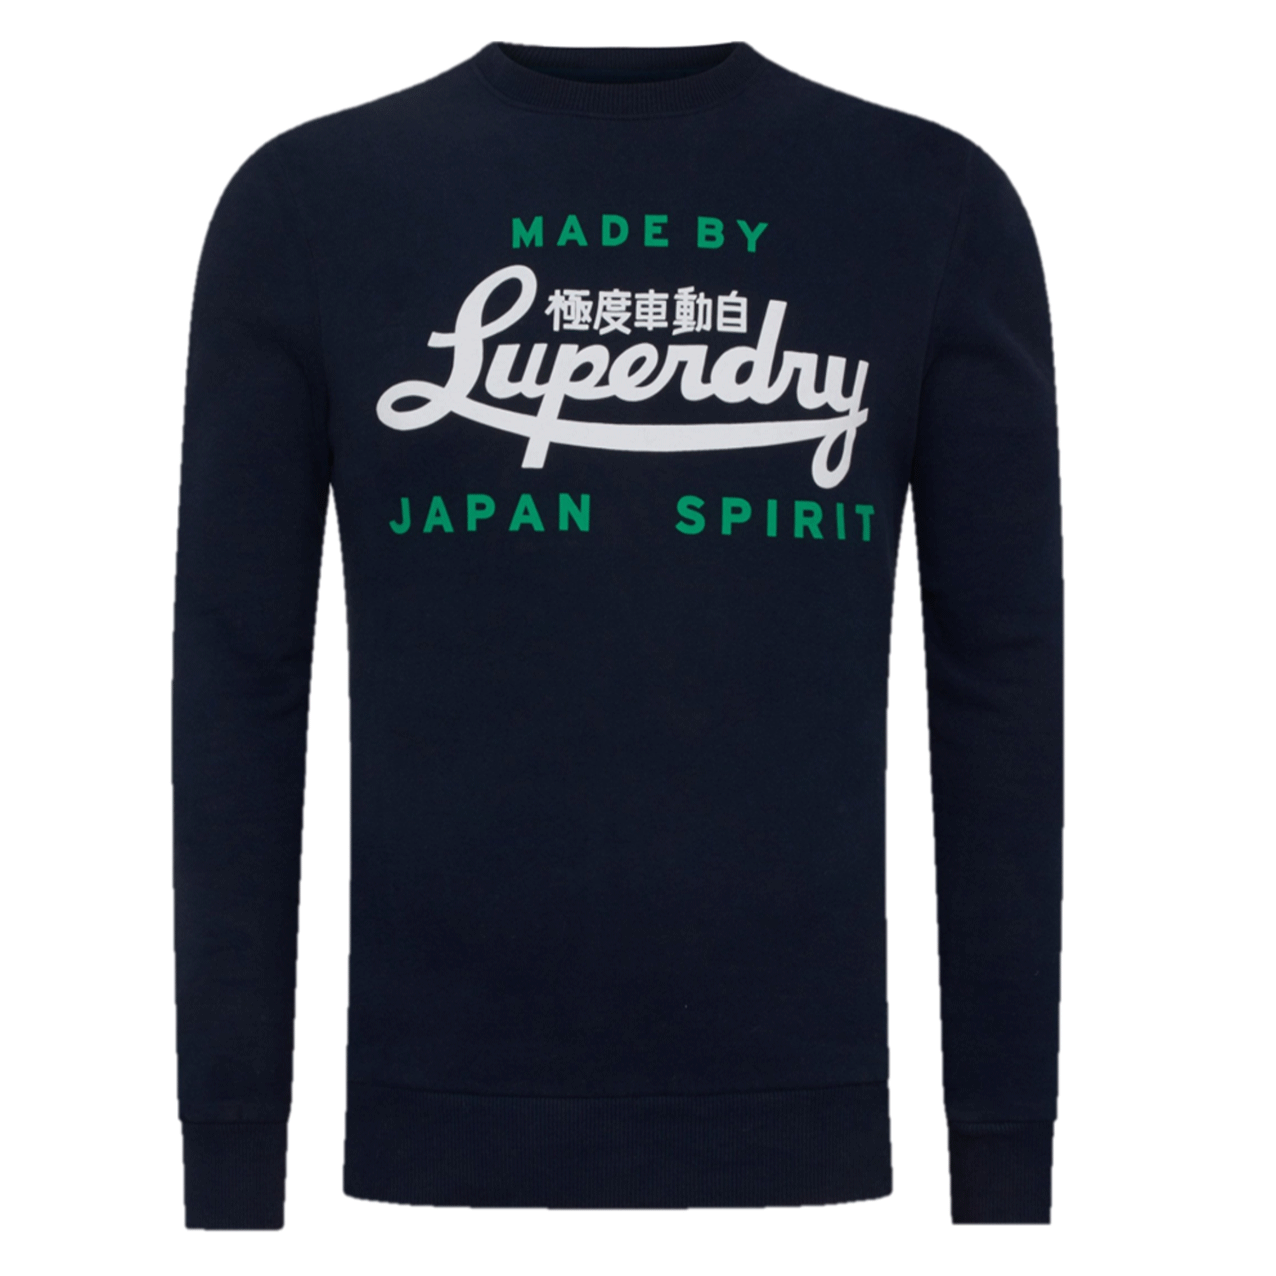 Superdry SCRIPT STYLE COL CREW NAVY M2011464A-09S